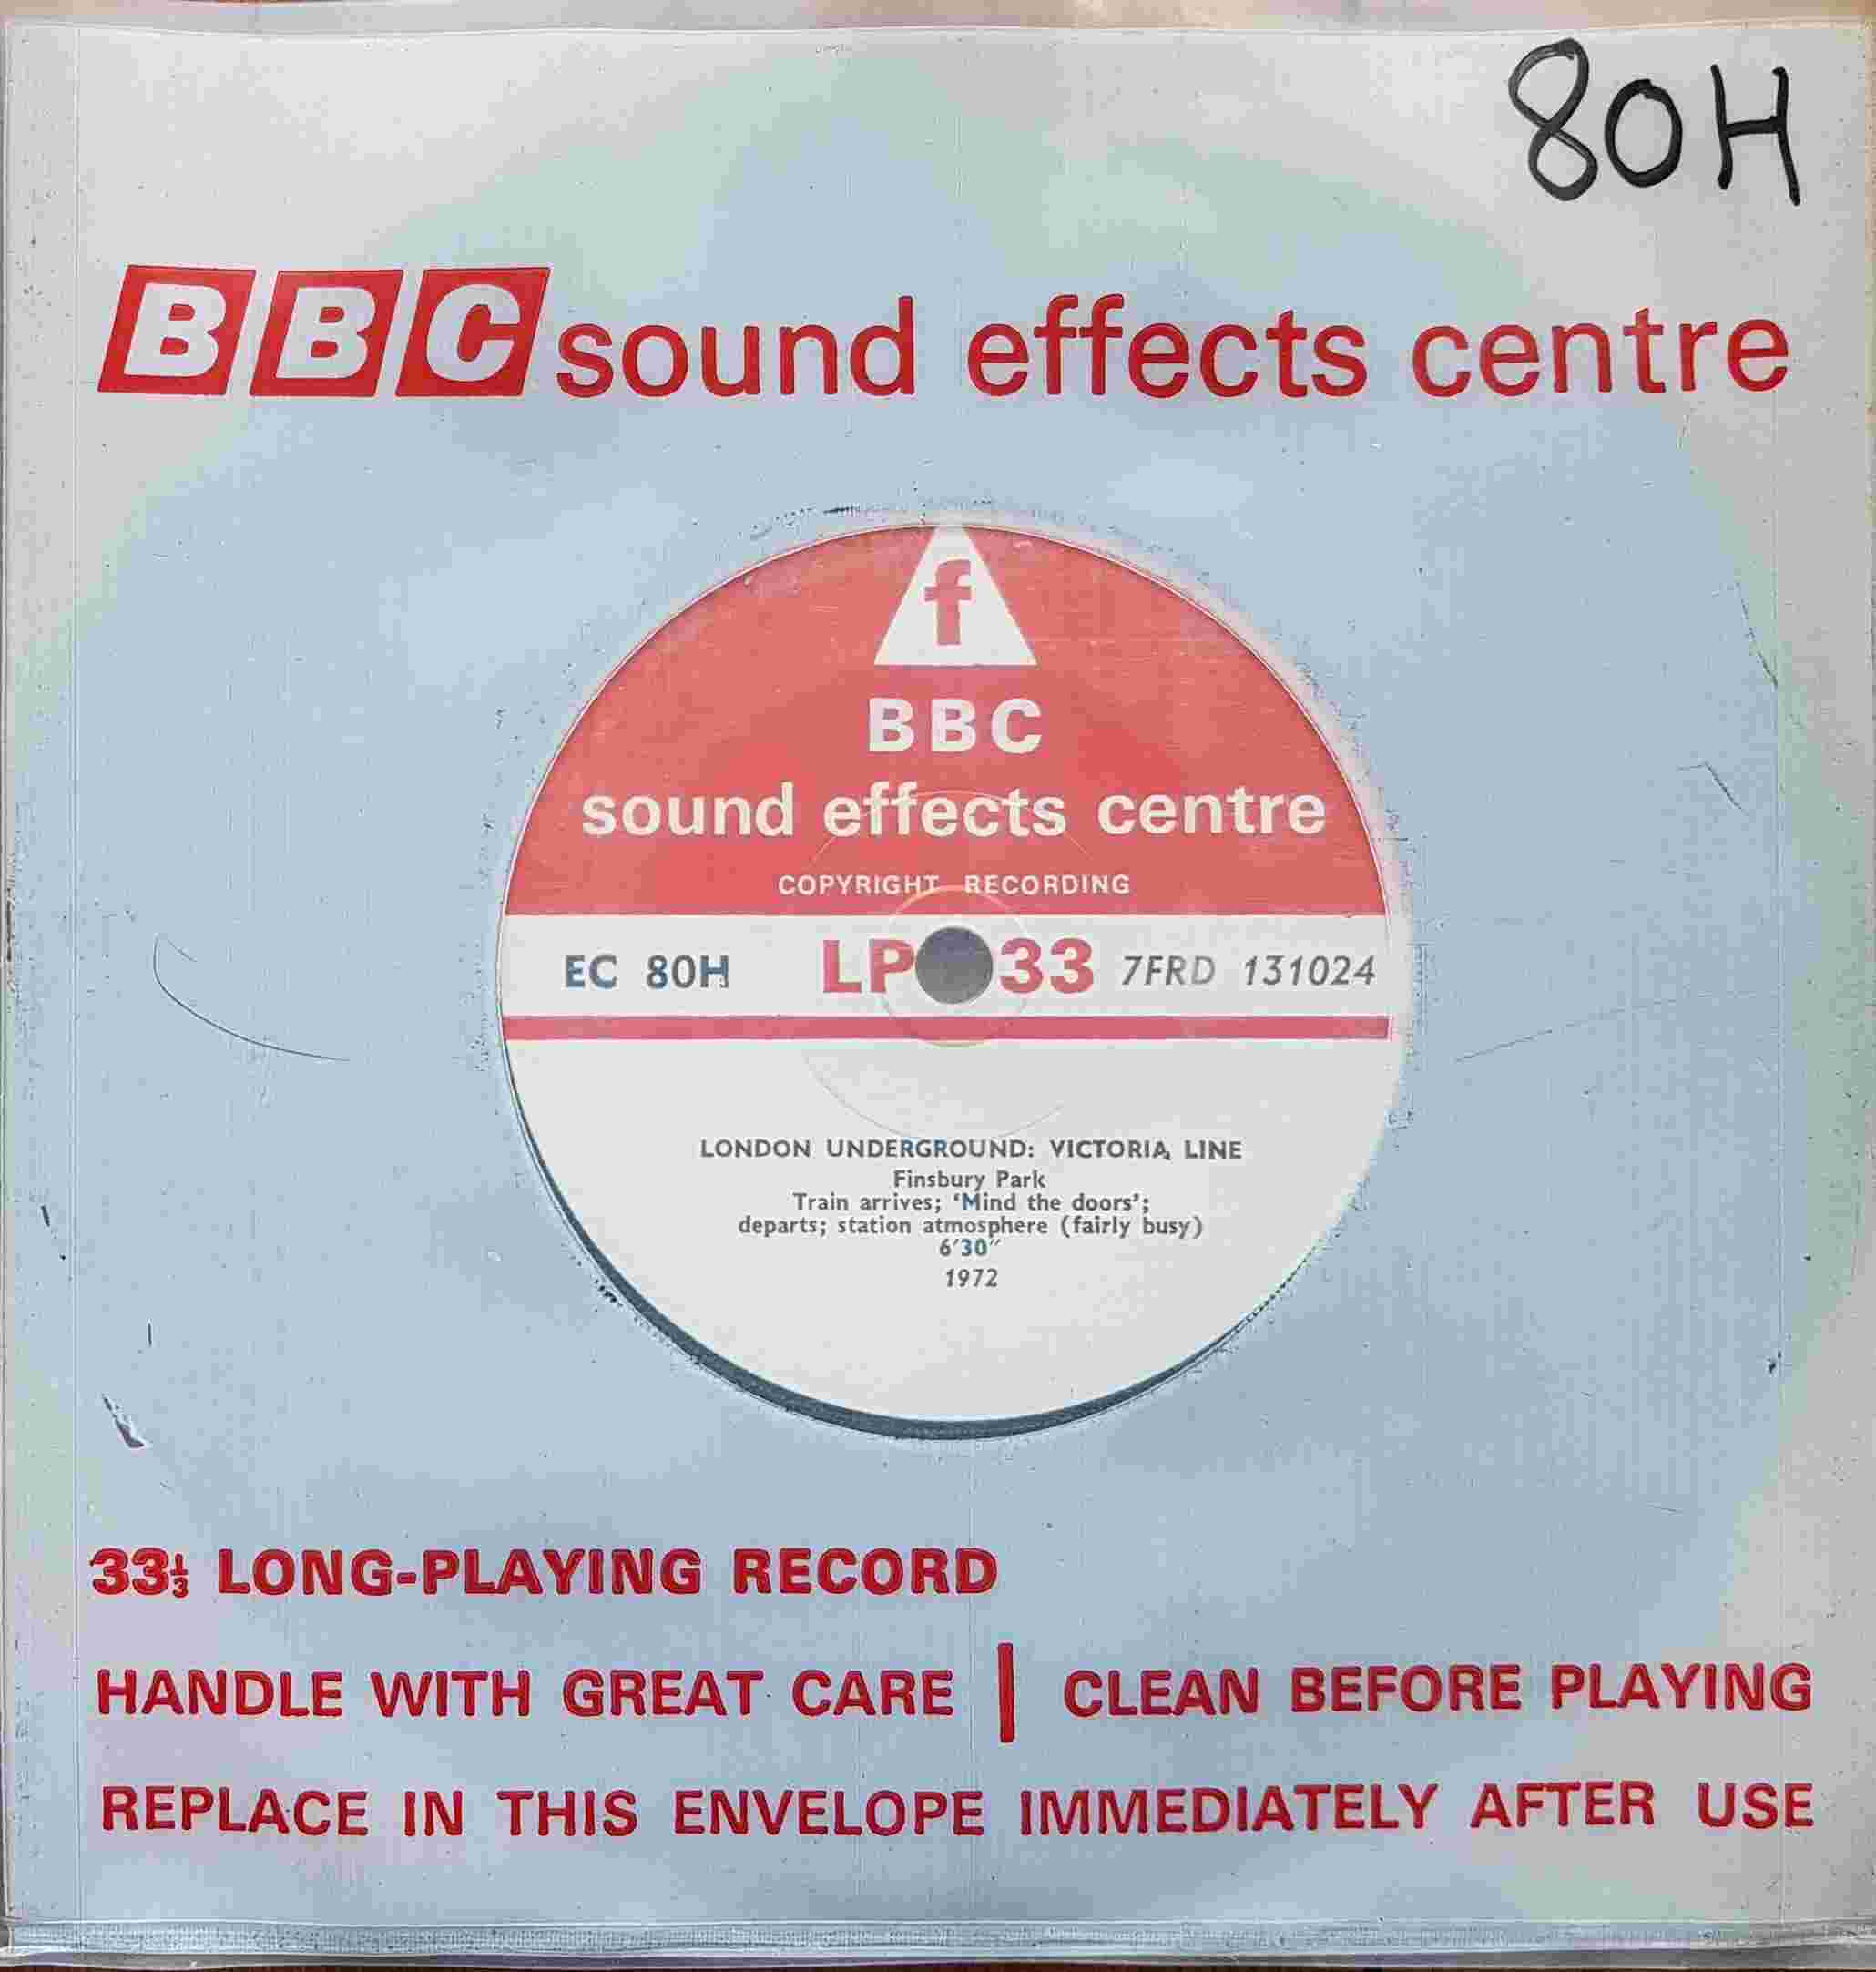 Picture of EC 80H London Underground - Victoria Line by artist Not registered from the BBC singles - Records and Tapes library